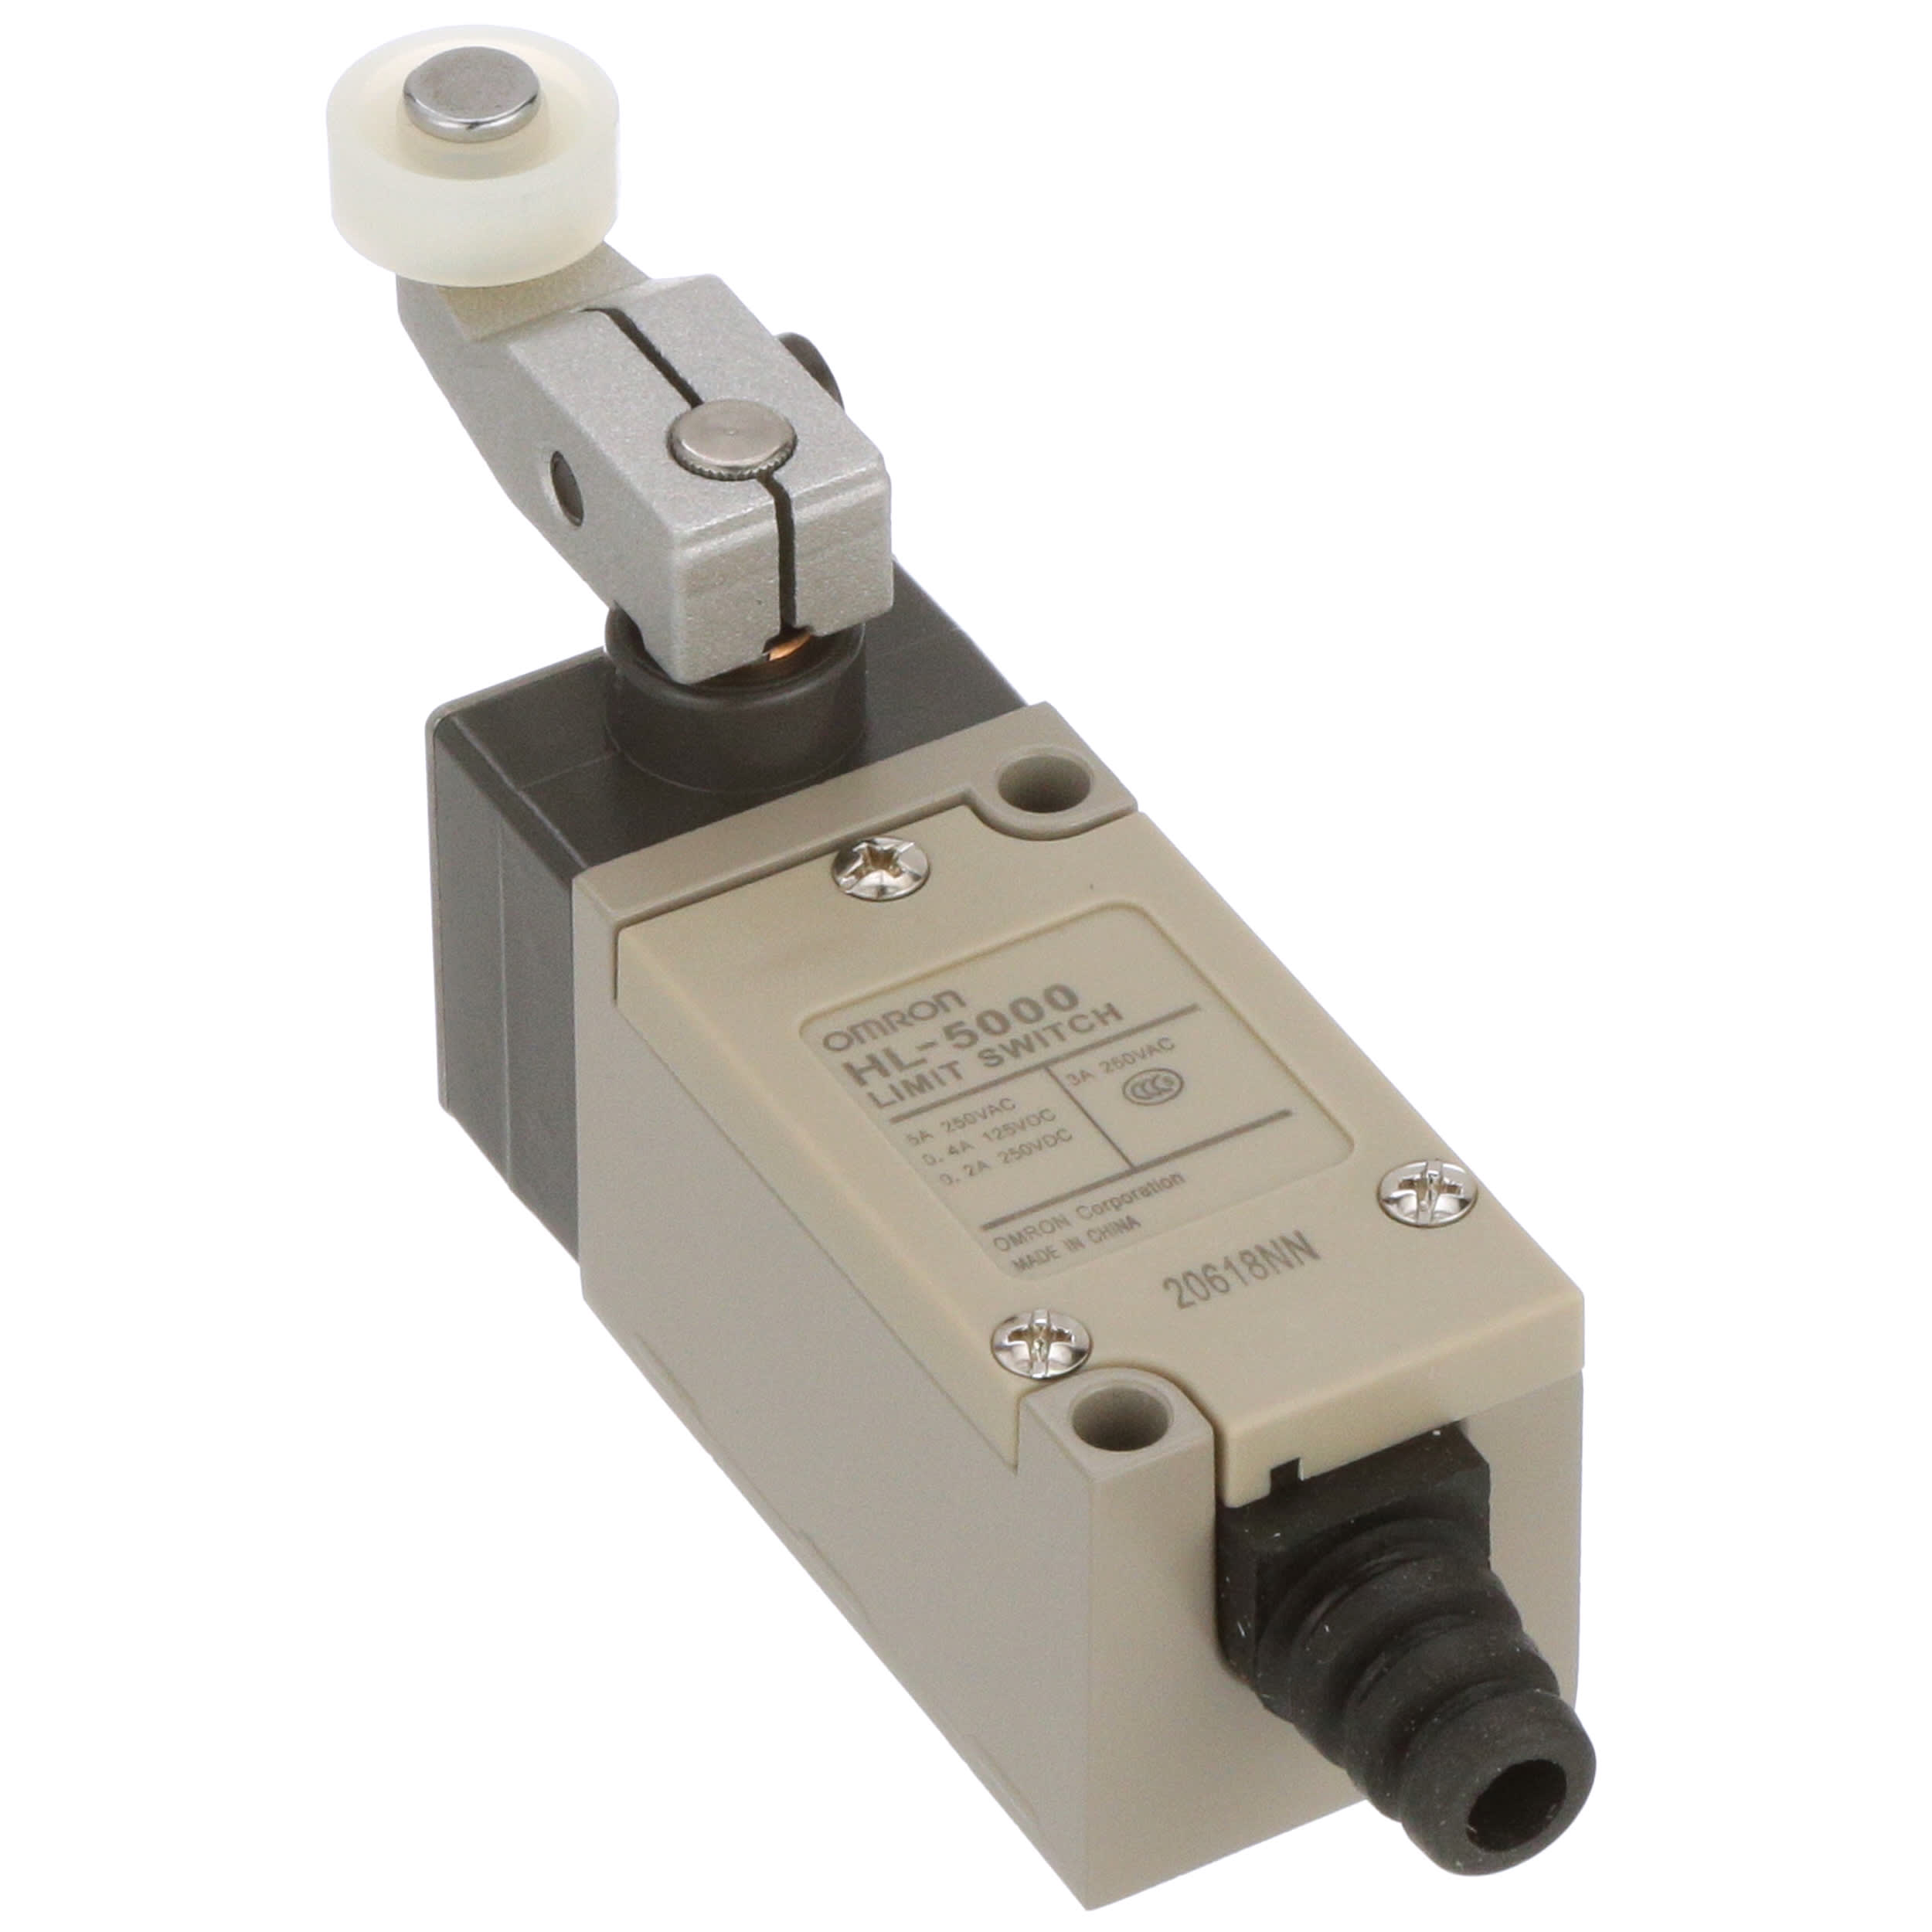 Omron Automation Hl 5000 Ip65 Limit Switch Roller Leverno Nc 250v Series Allied Electronics Automation